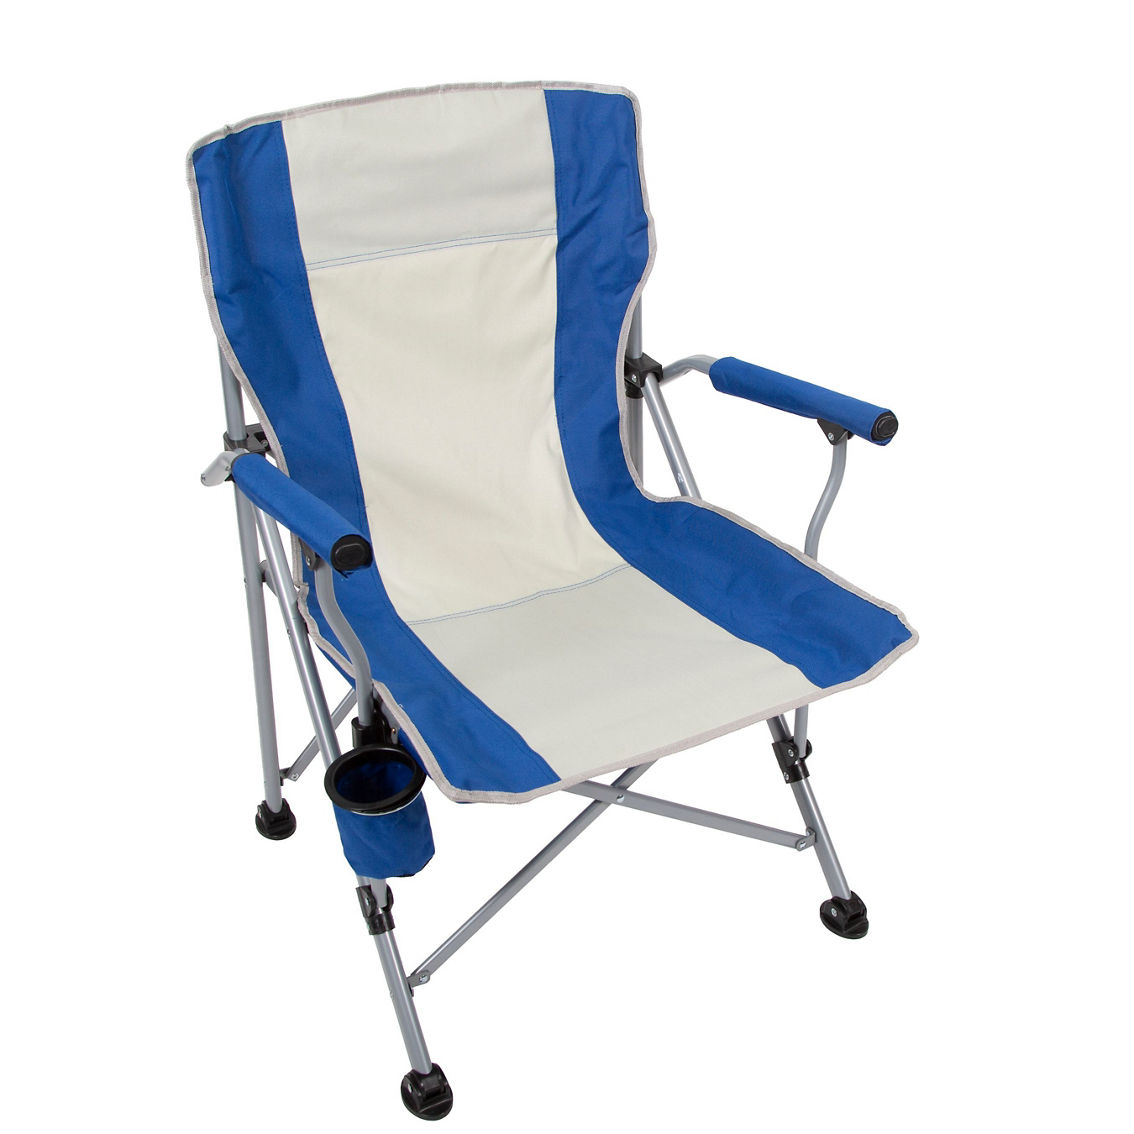 Stansport Mesa Camp Chair - Blue/Grey - Image 2 of 5